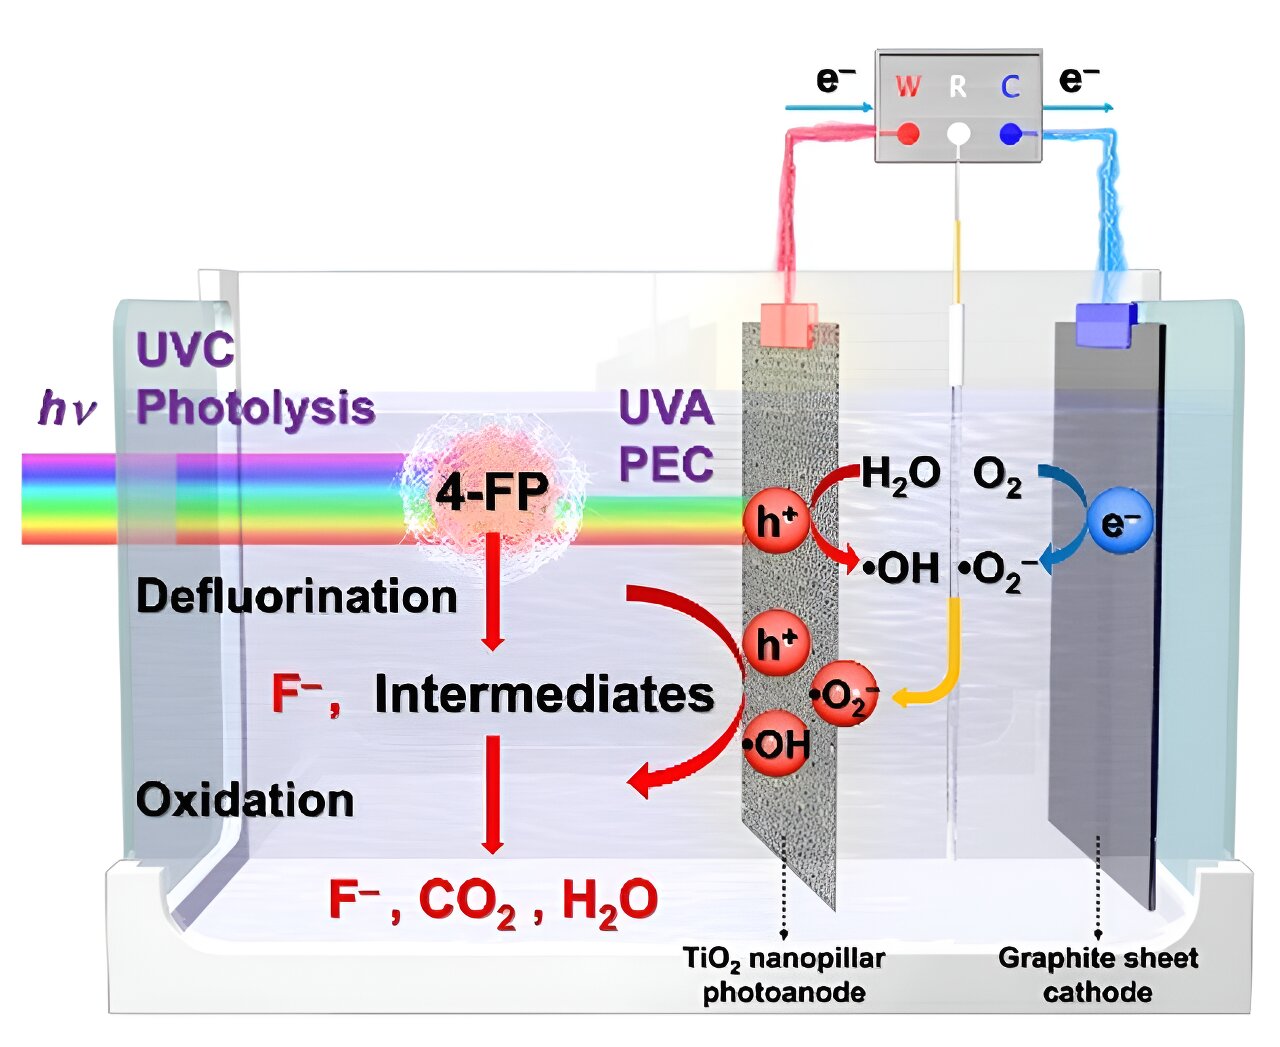 #A synchronous defluorination-oxidation process for degradation of fluoroarenes with PEC